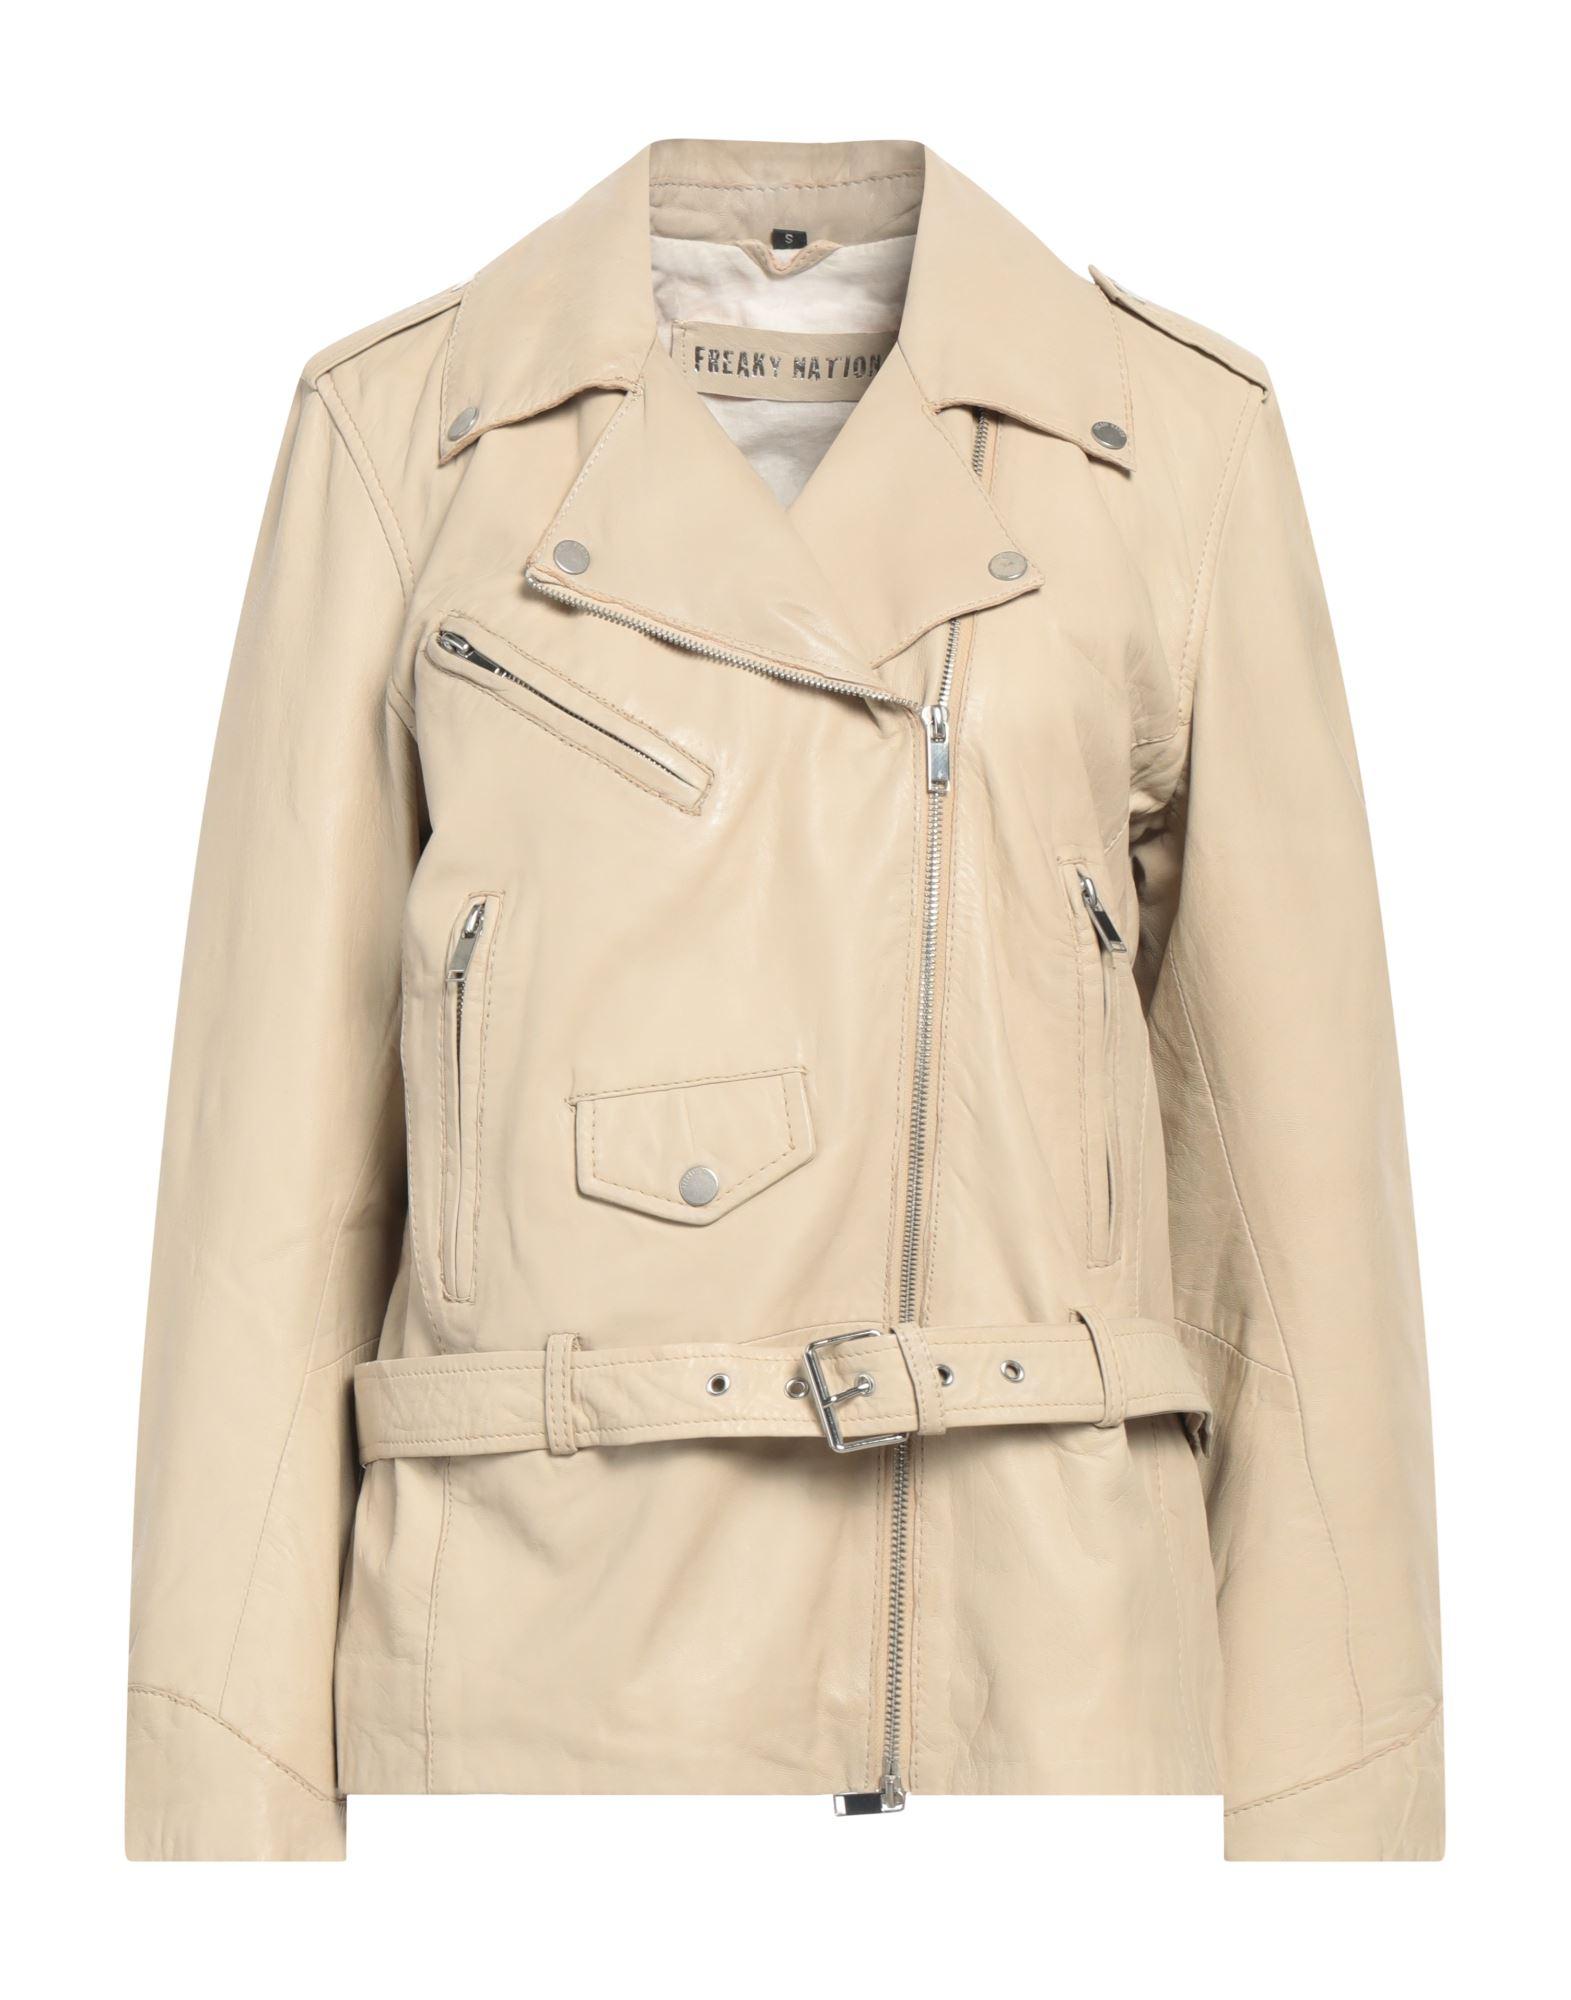 Freaky Nation Jacket in Natural | Lyst